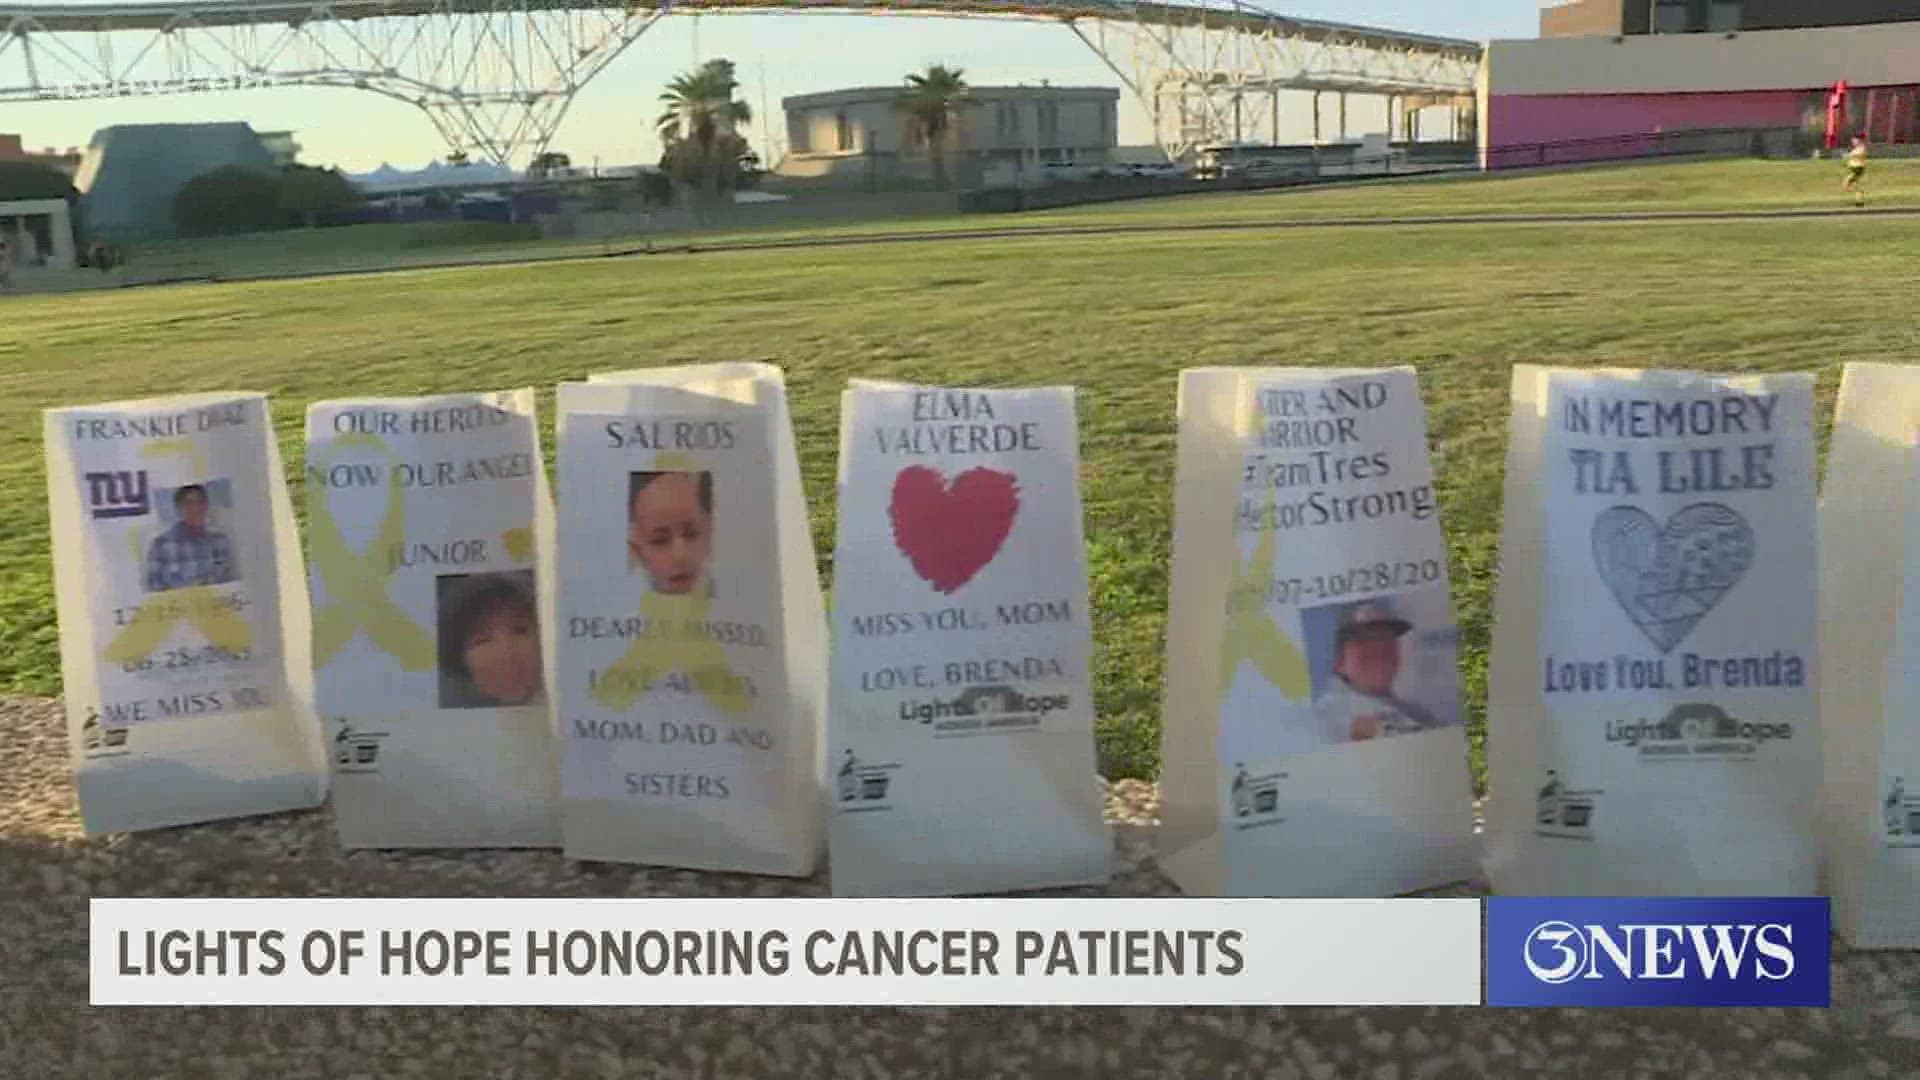 “I want family members to know that their loved ones are not forgotten,” said Rebecca Esparza.